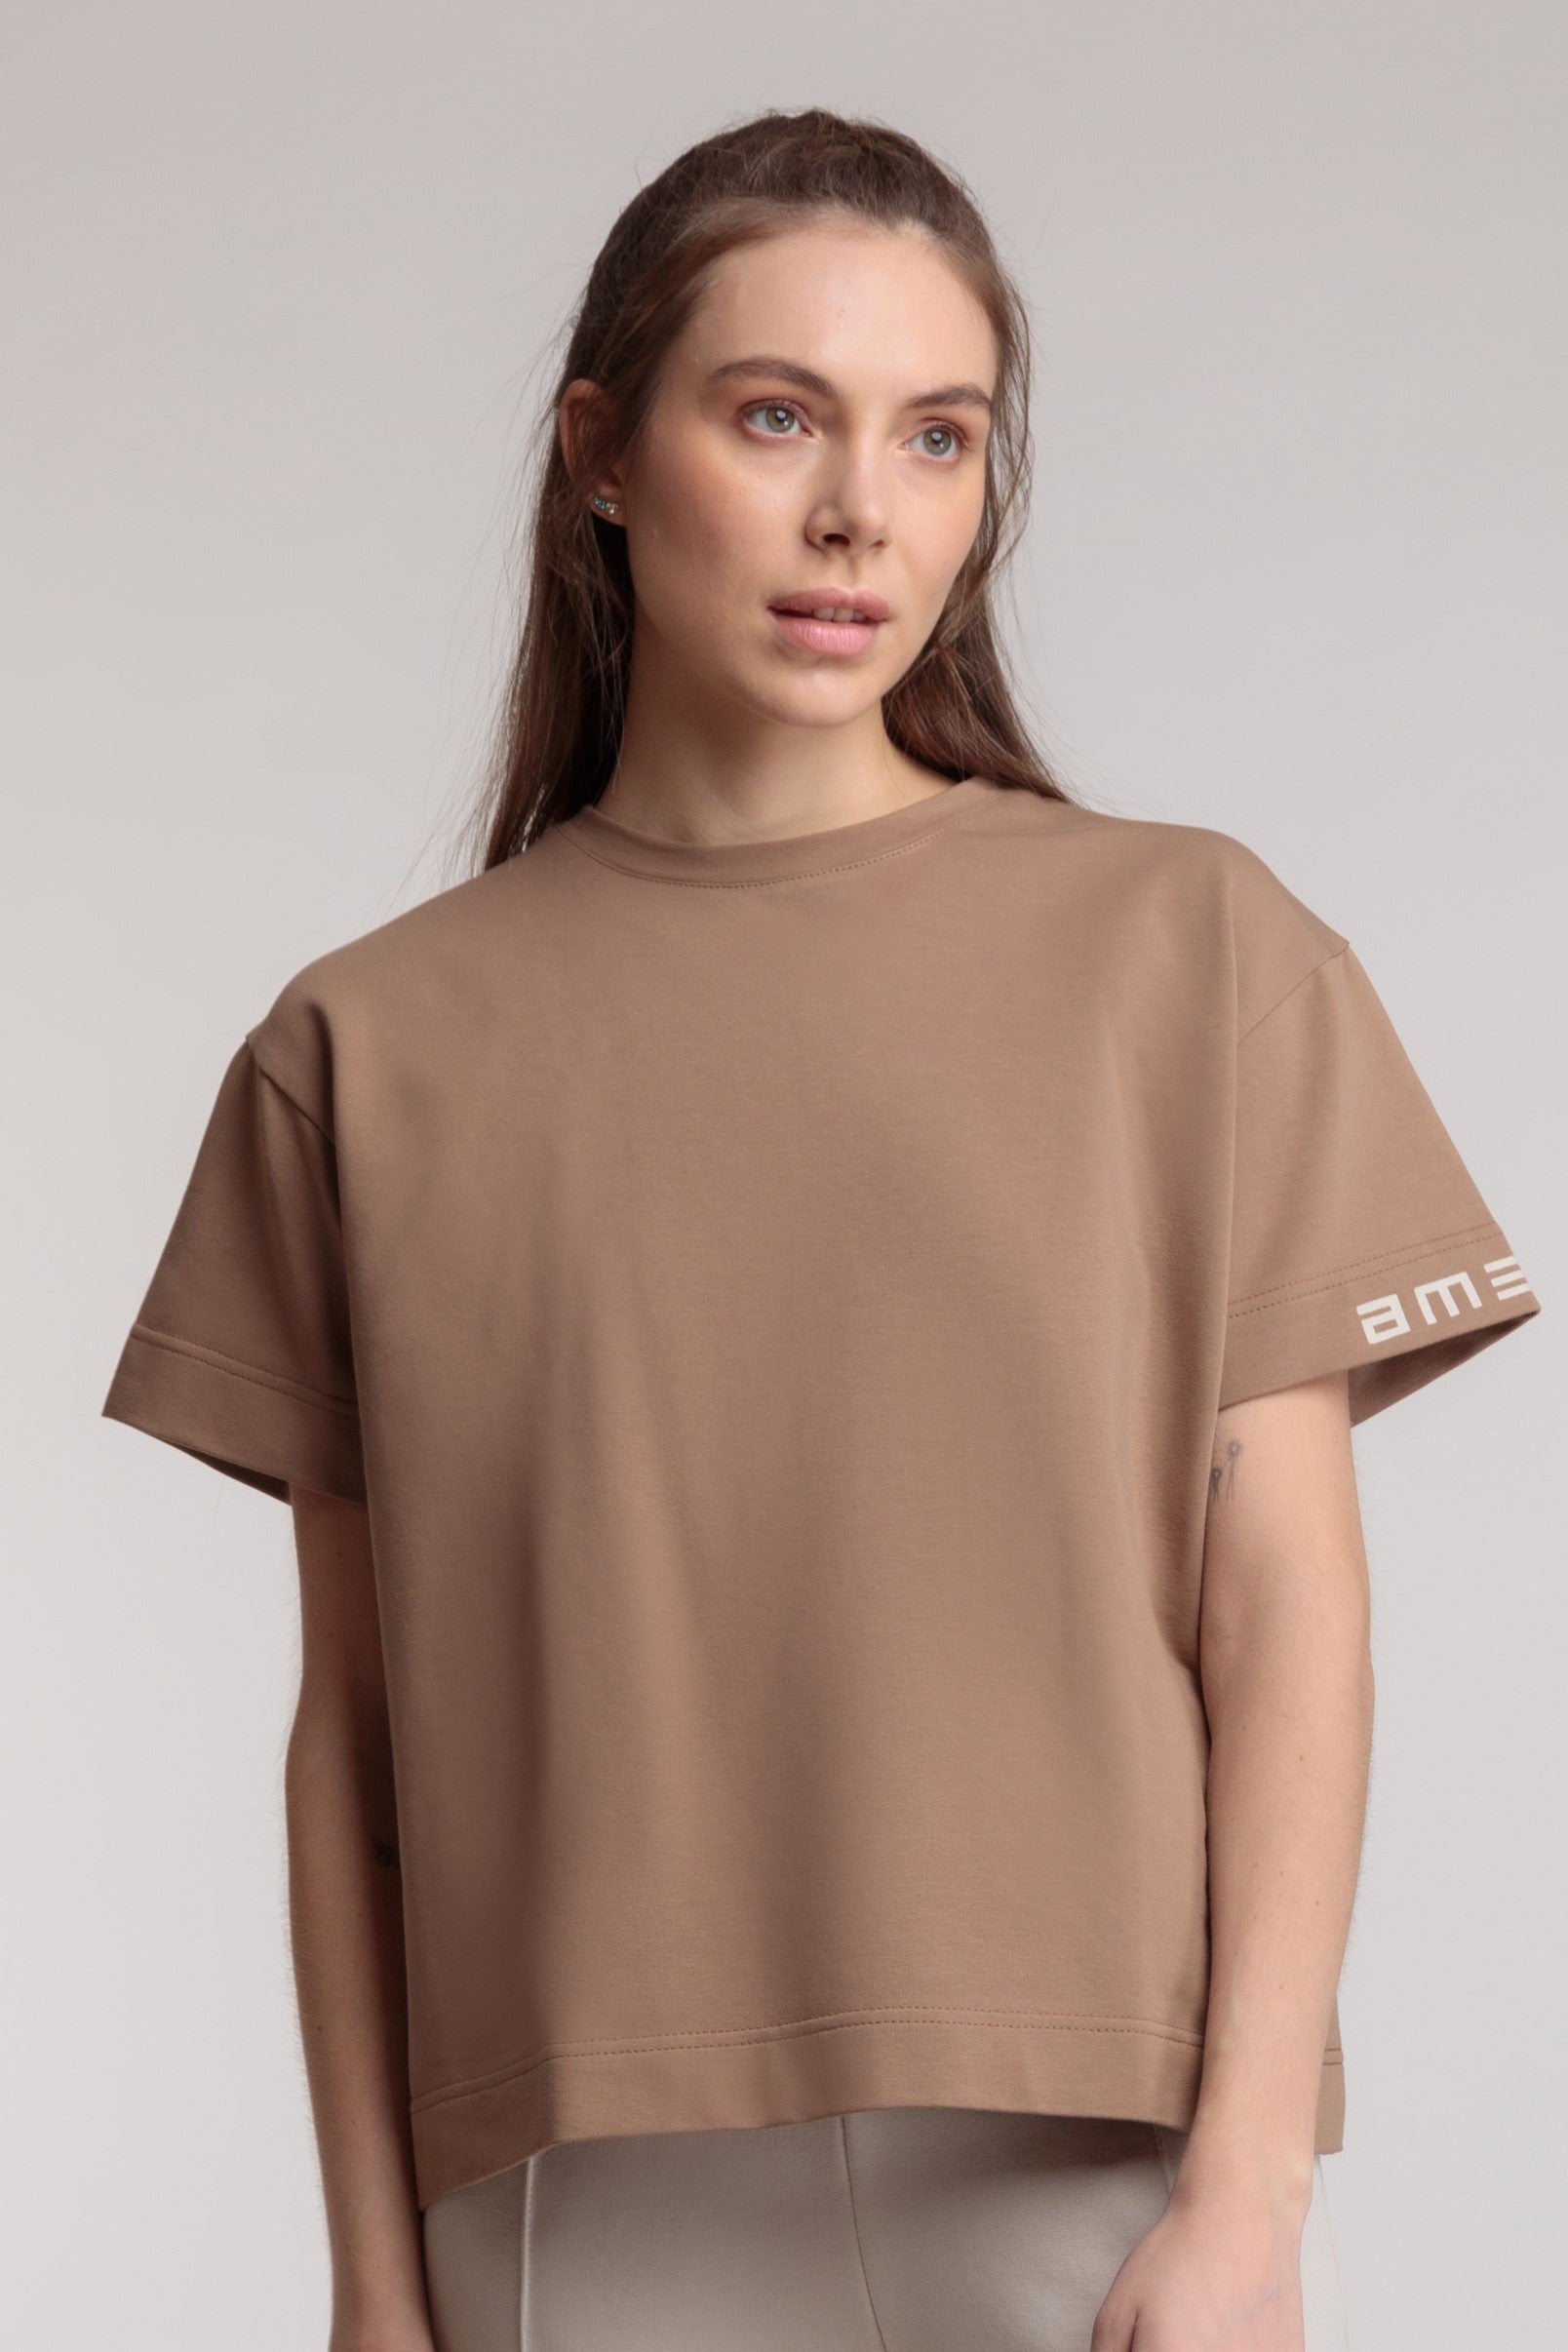 Straight women's T-shirt in beige color, logo on the sleeve